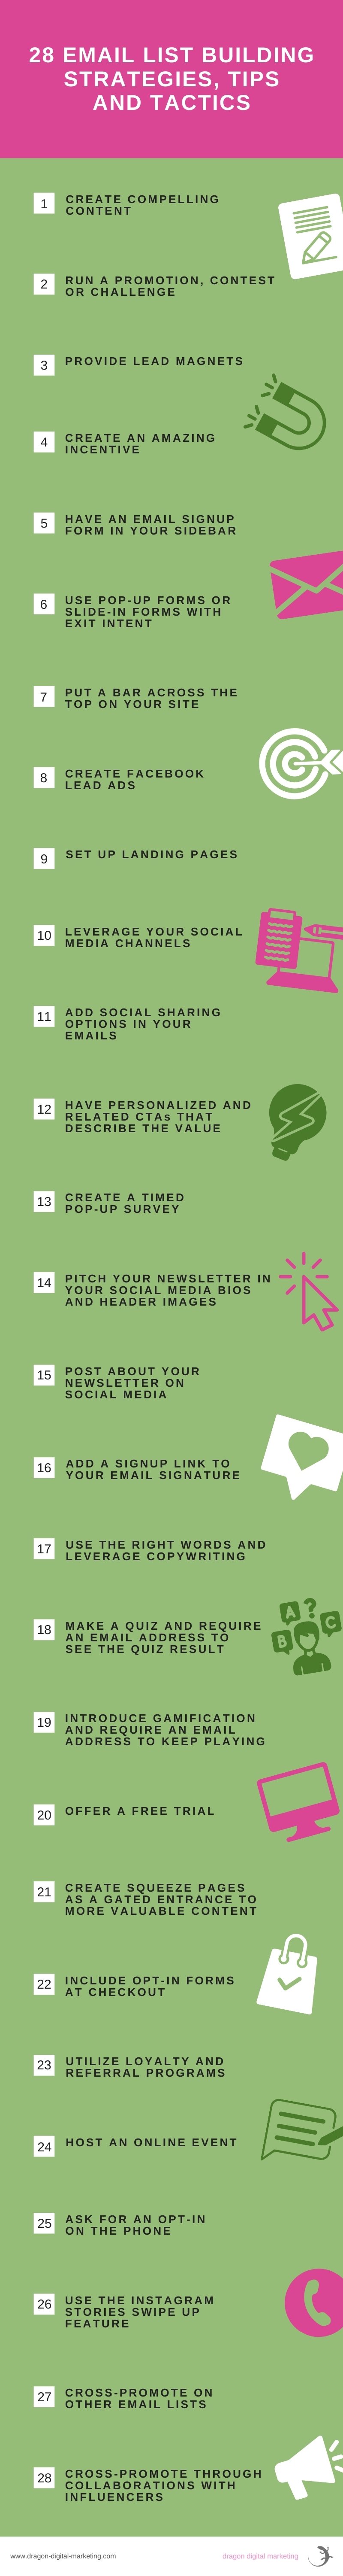 28 Email List Building Strategies, Tips and Tactics Infographic